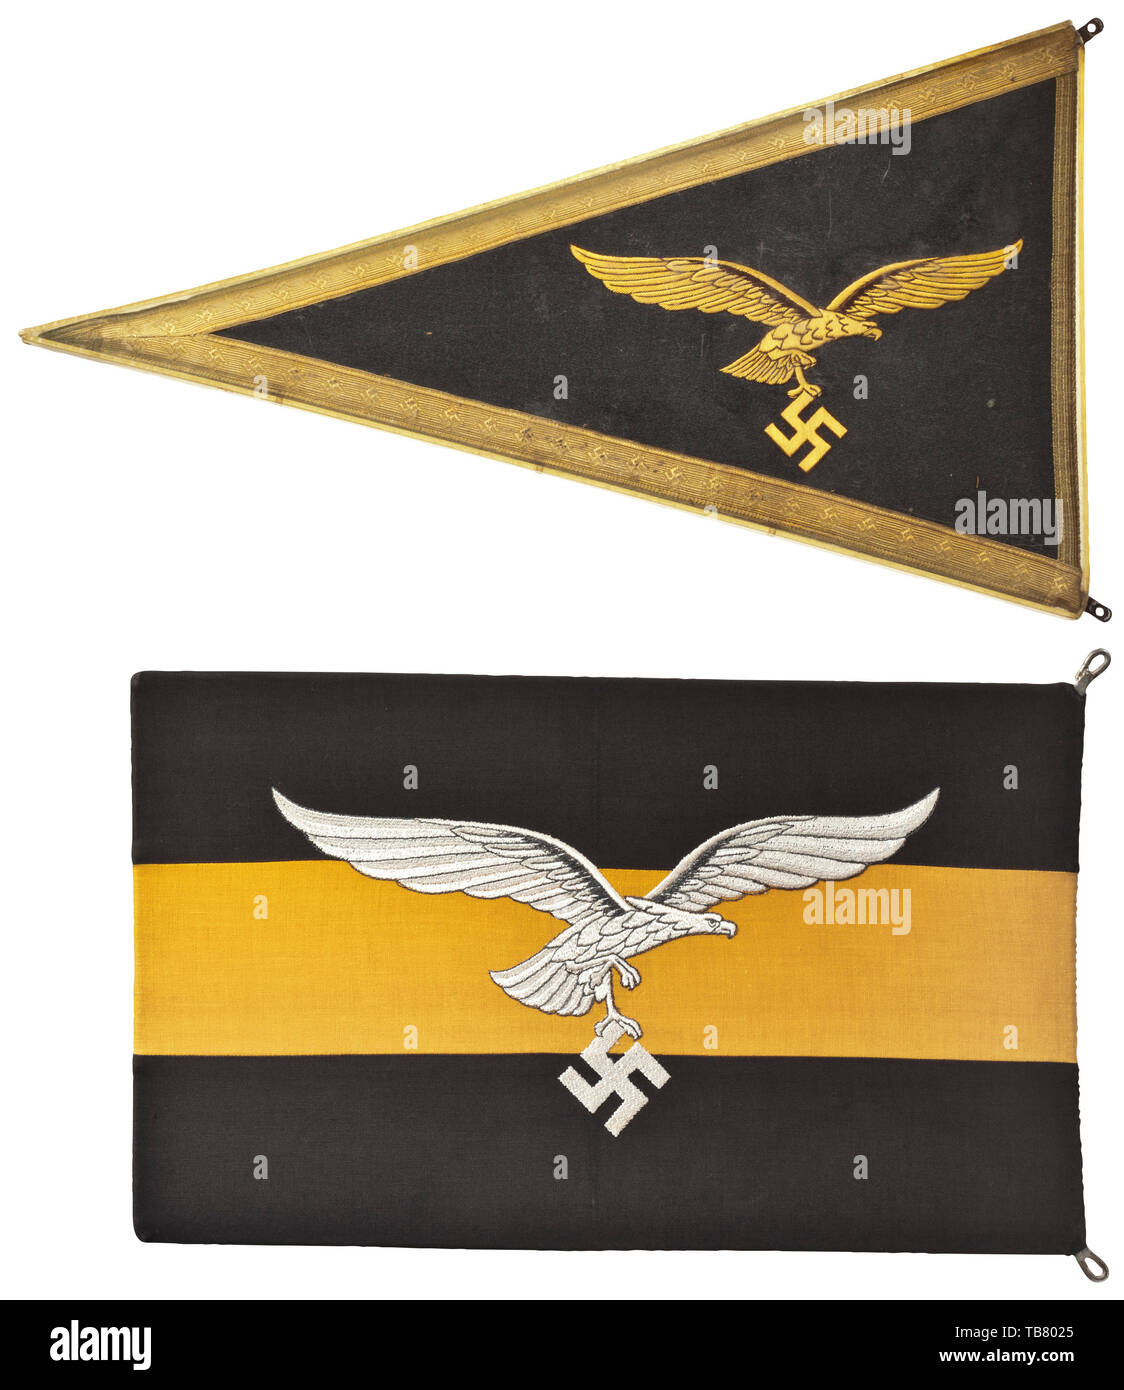 A vehicle standard for a general in the Luftwaffe, On both sides a yellow arrased Luftwaffe eagle, outlined in brown on dark grey cloth, a border of gold braid with a swastika motif, celluloid cover (a few small cracks). Dimensions circa 26 x 45 cm. Includes another standard for a commanding officer in the Luftwaffe, on both sides a woven white Luftwaffe eagle, outlined in grey on grey-yellow-grey cloth. Dimensions circa 26 x 40 cm. Slight signs of age and use. Rare standards in superb condition. historic, historical 20th century, Editorial-Use-Only Stock Photo